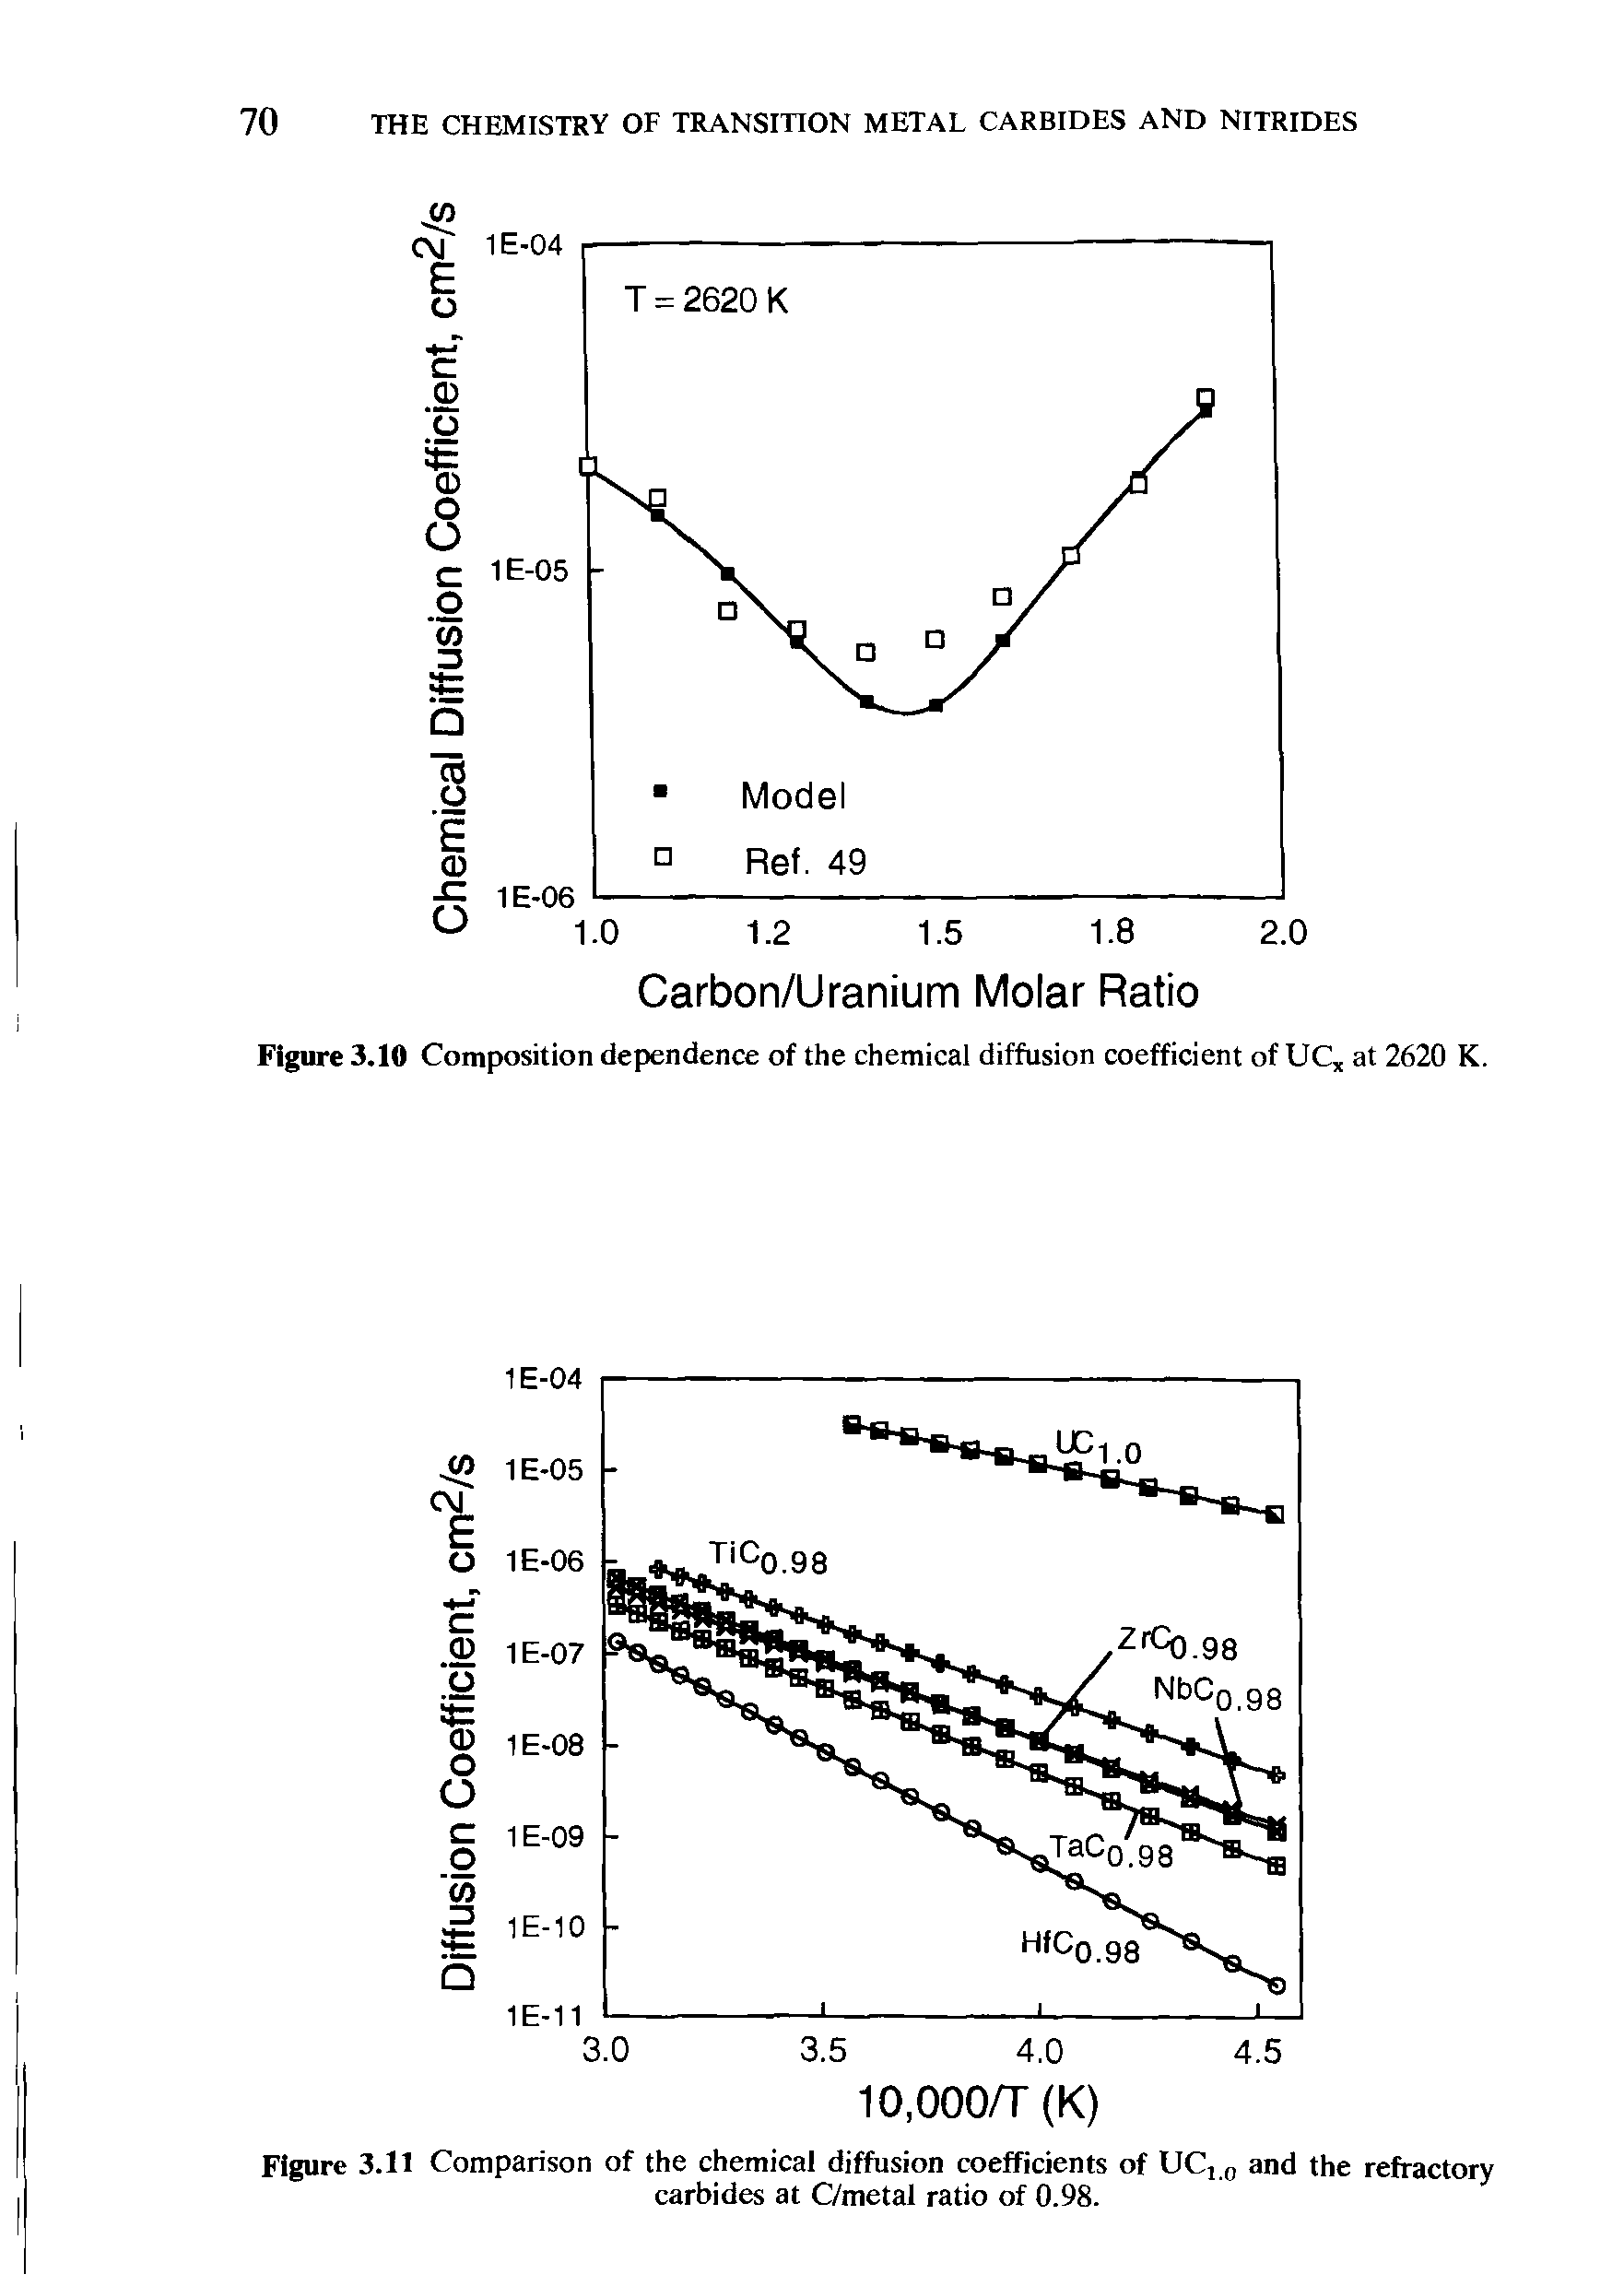 Figure 3.11 Comparison of the chemical diffusion coefficients of UCj 0 and the refractory carbides at C/metal ratio of 0.98.